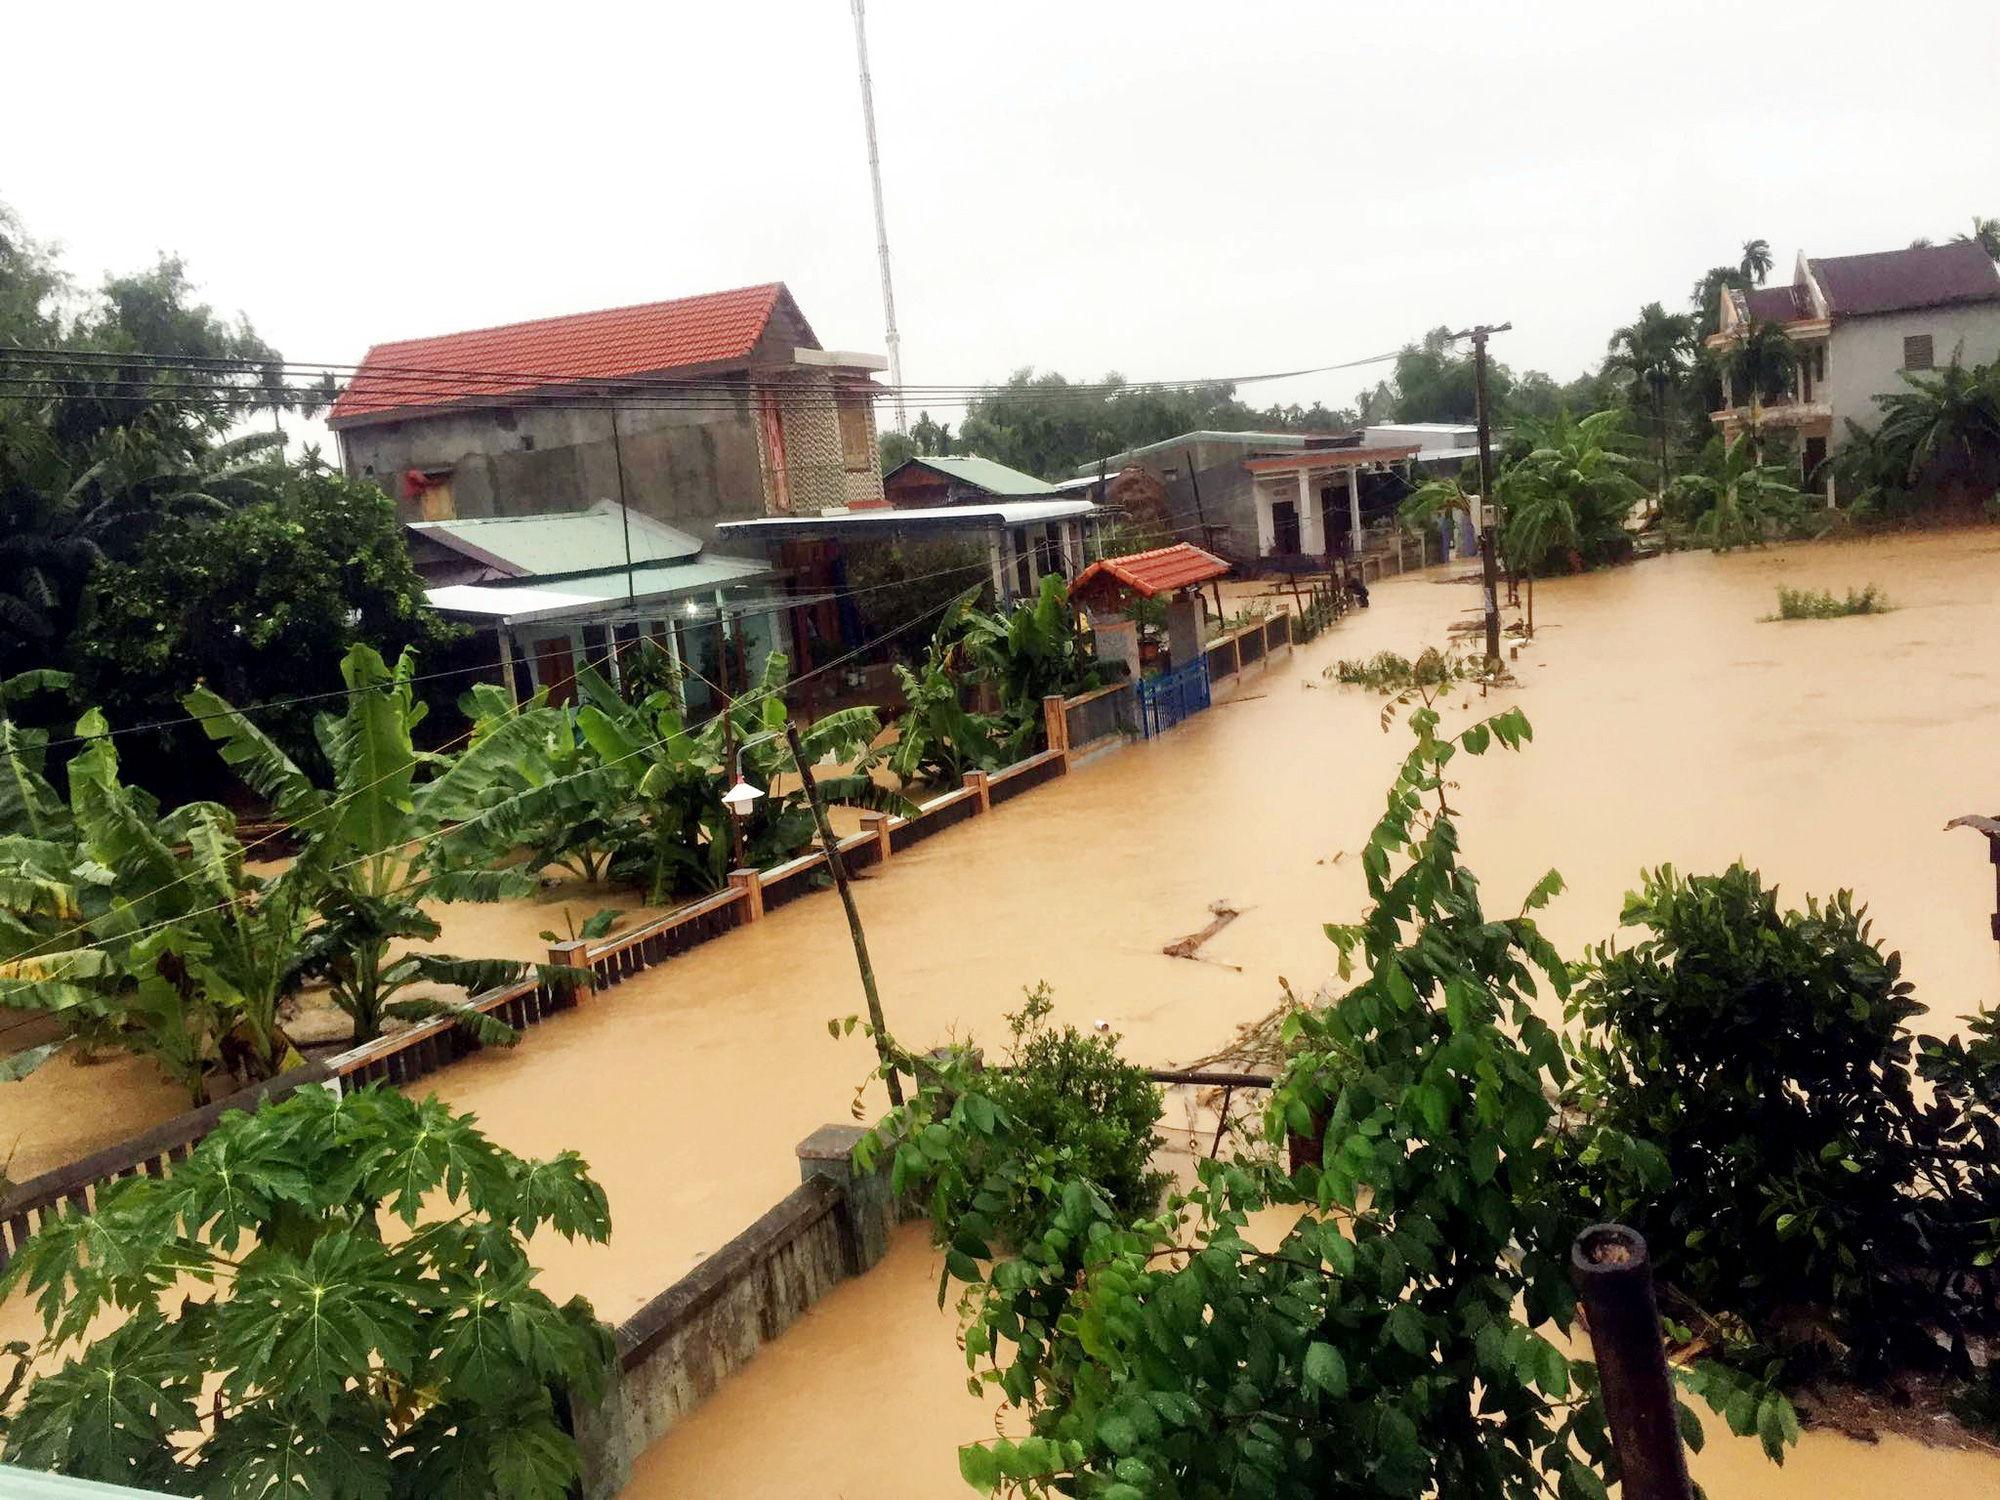 Nearly 11,000 people evacuated, 4 dead, 7 missing in central Vietnam due to serious flooding